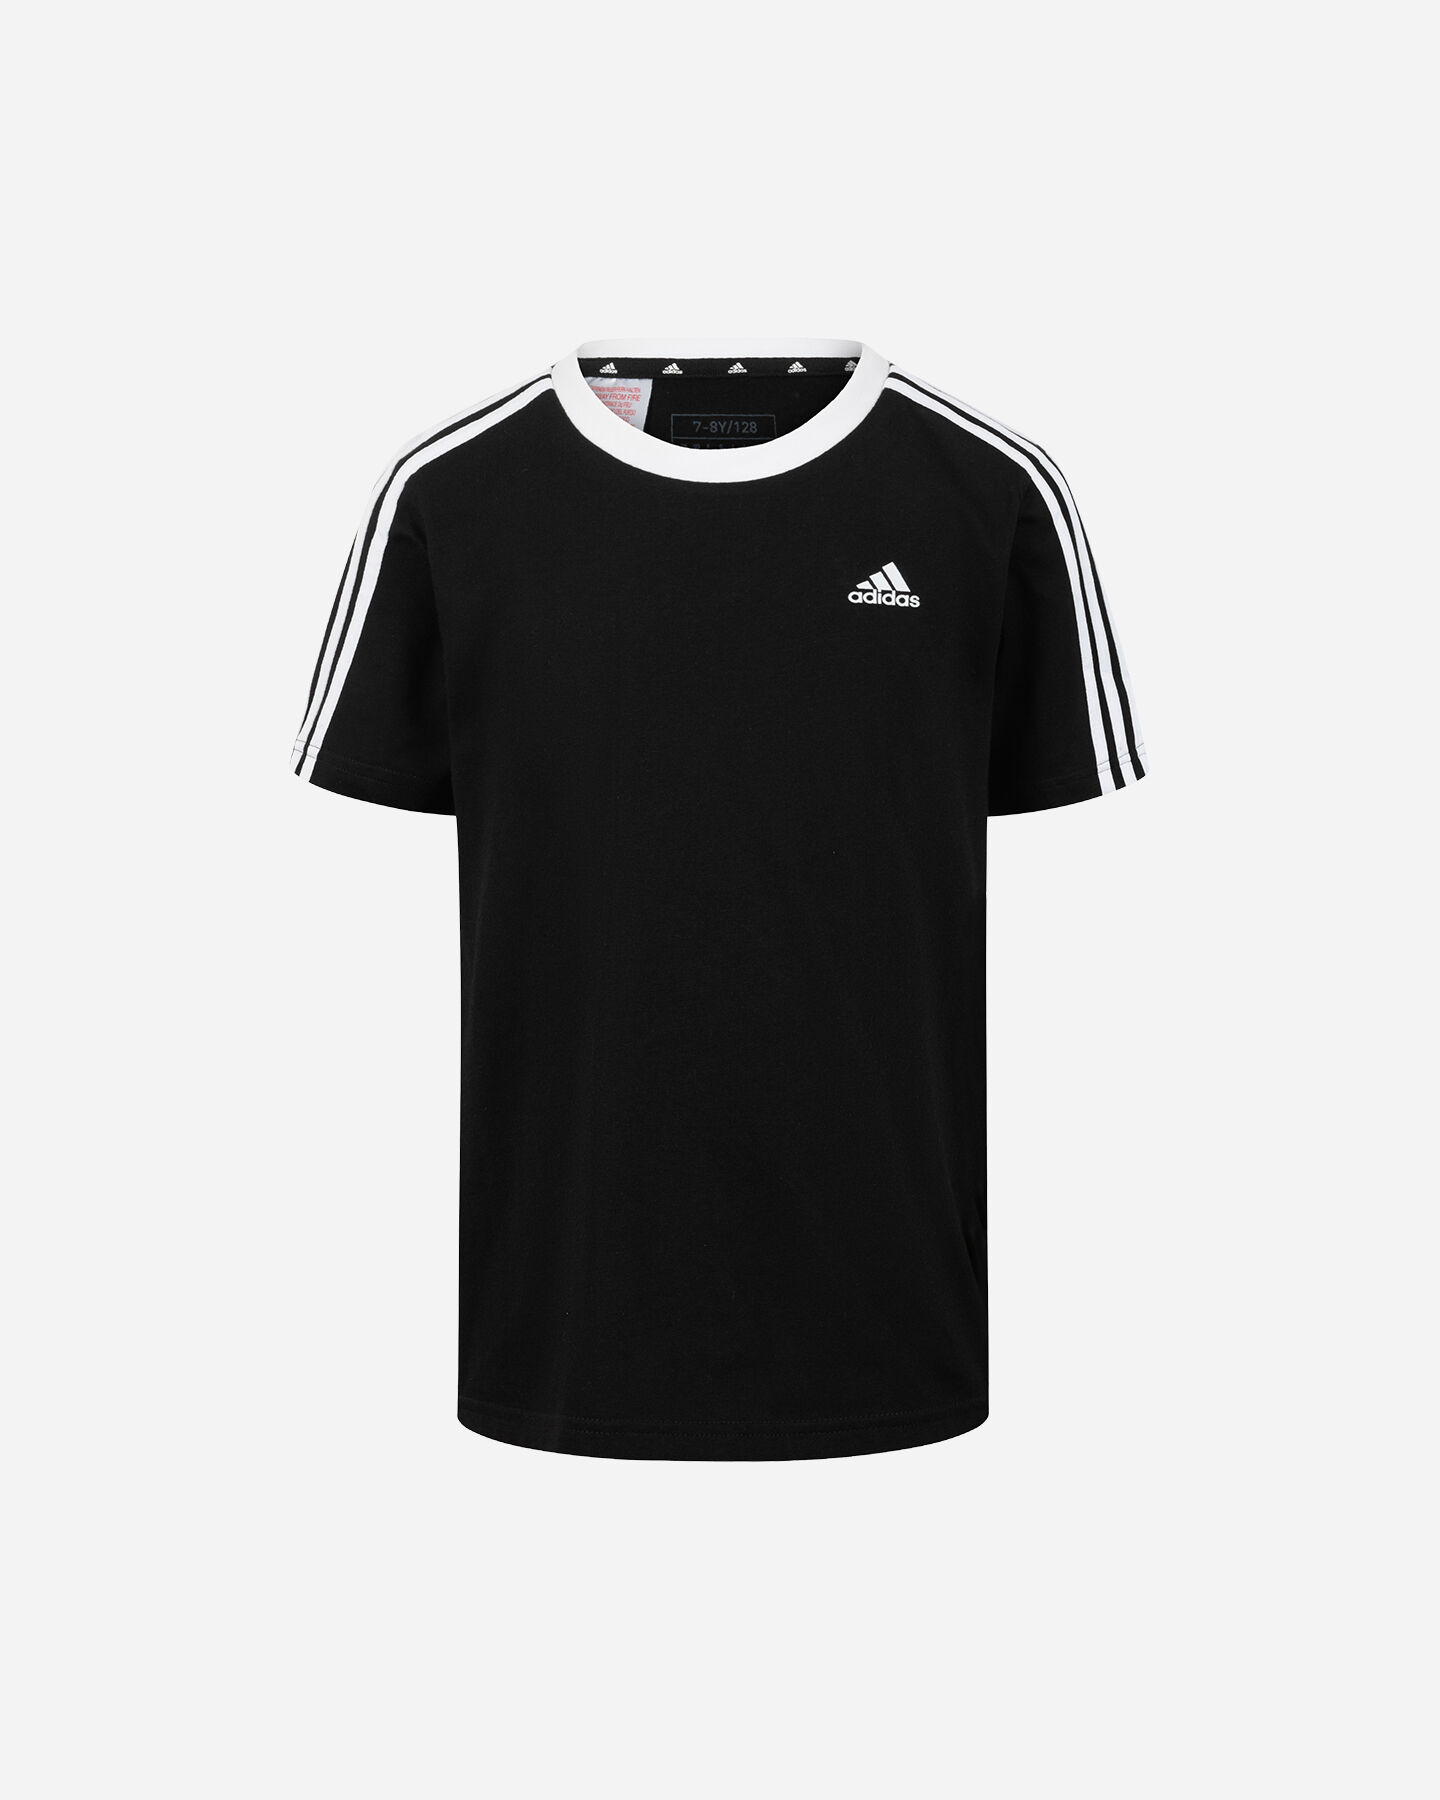  T-Shirt ADIDAS GIRL JR S5521714|UNI|7-8A scatto 0